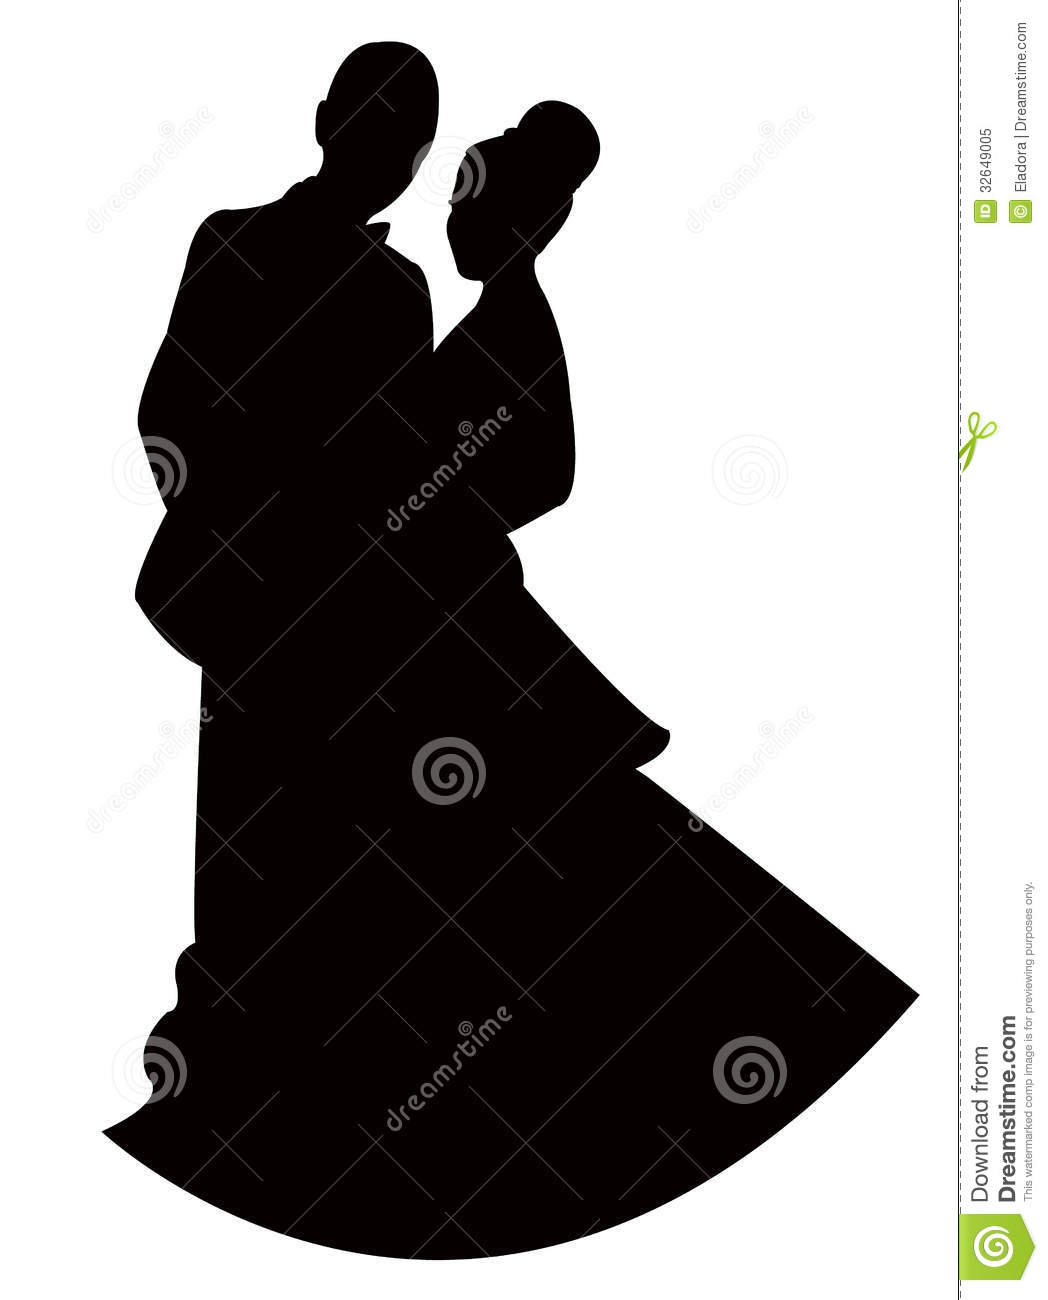 Vector Of A Couple Royalty Free Stock Photo   Image  32649005